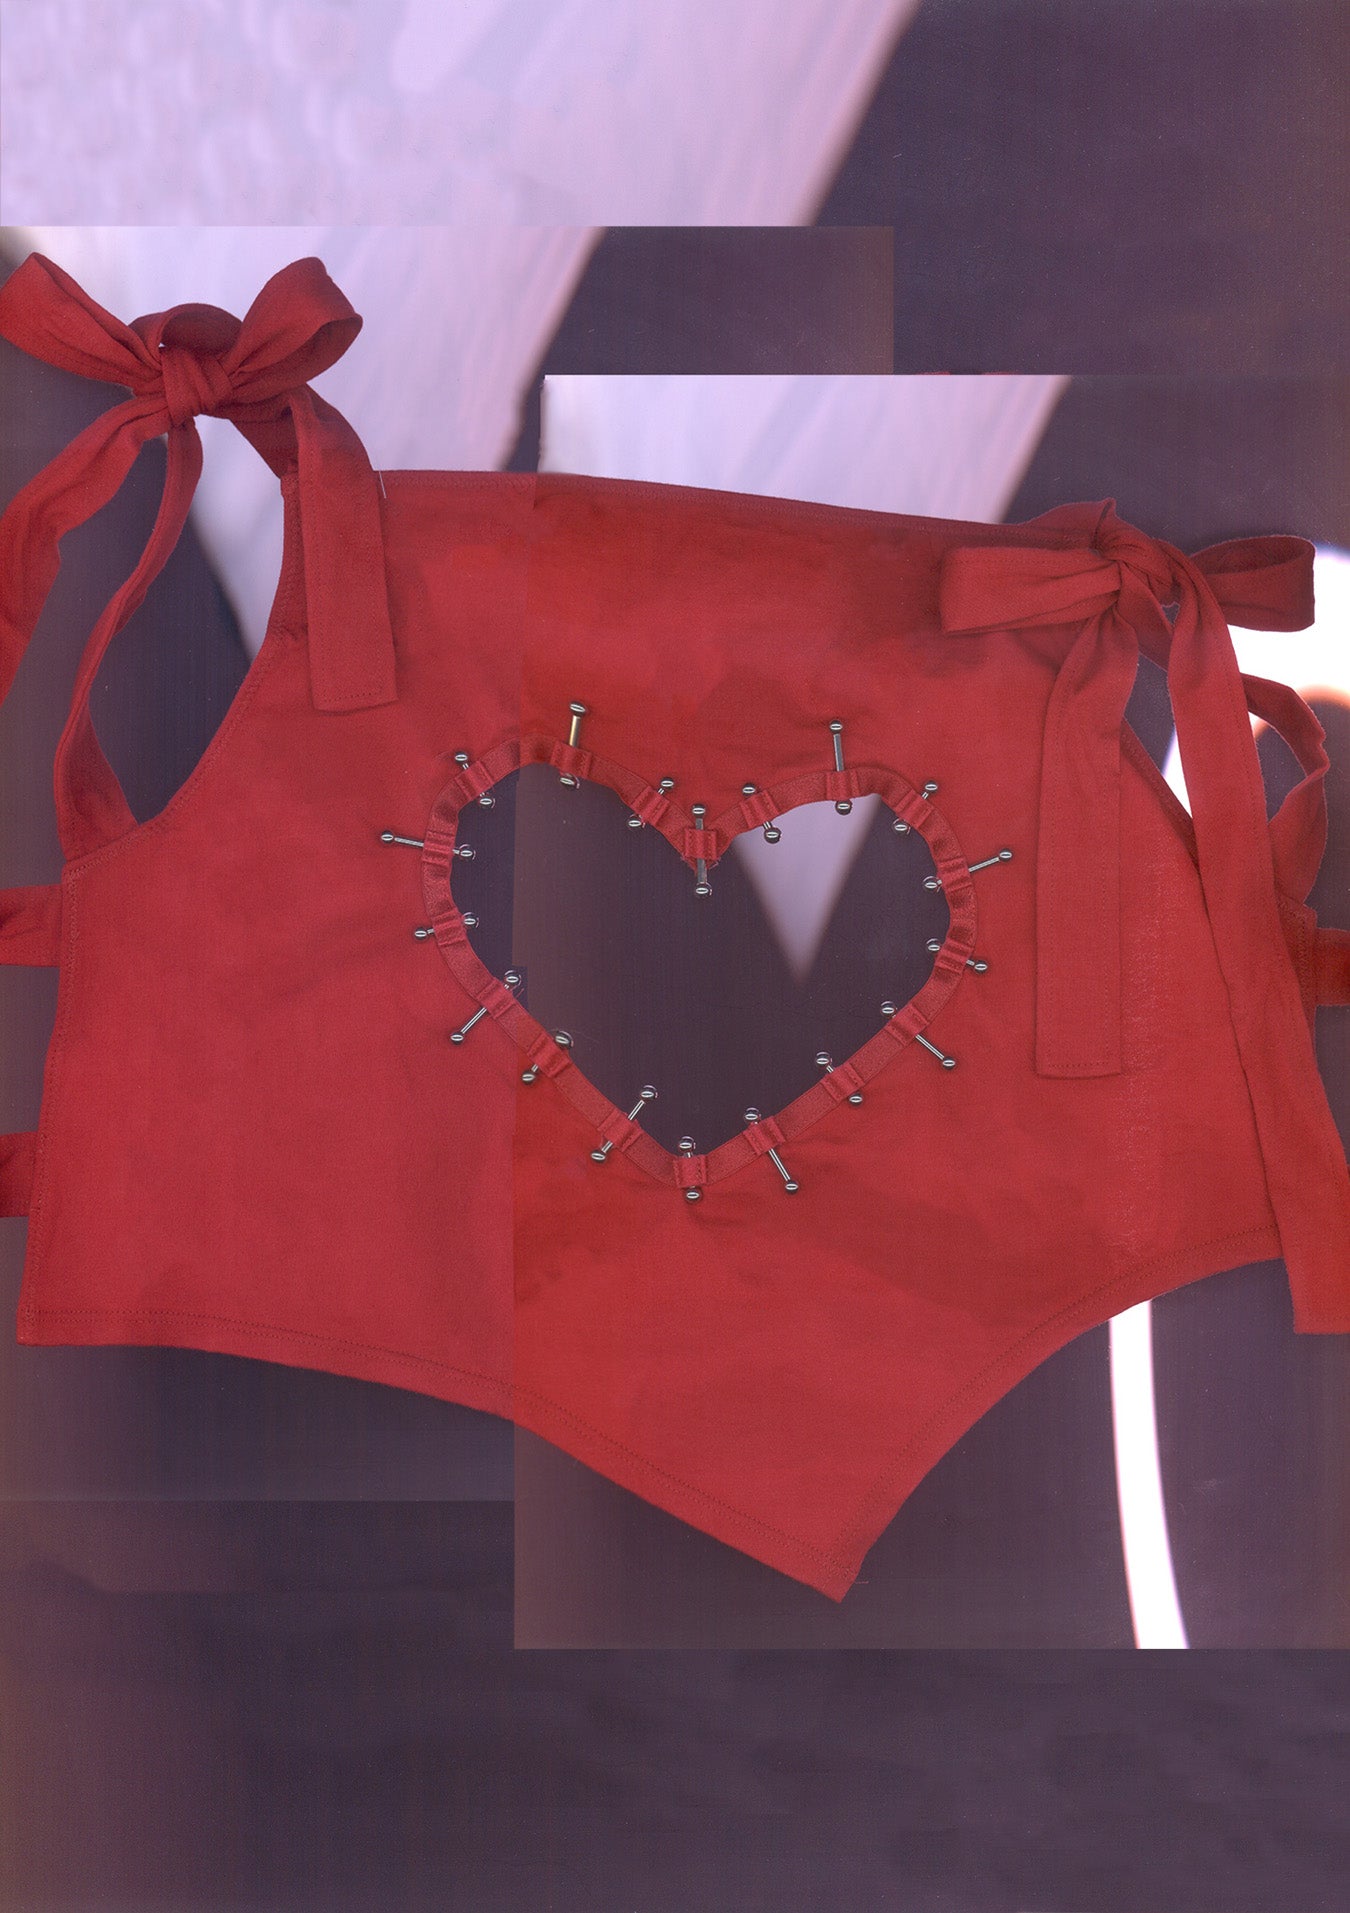 Lovefool Heart Cutout Bow Top In Red